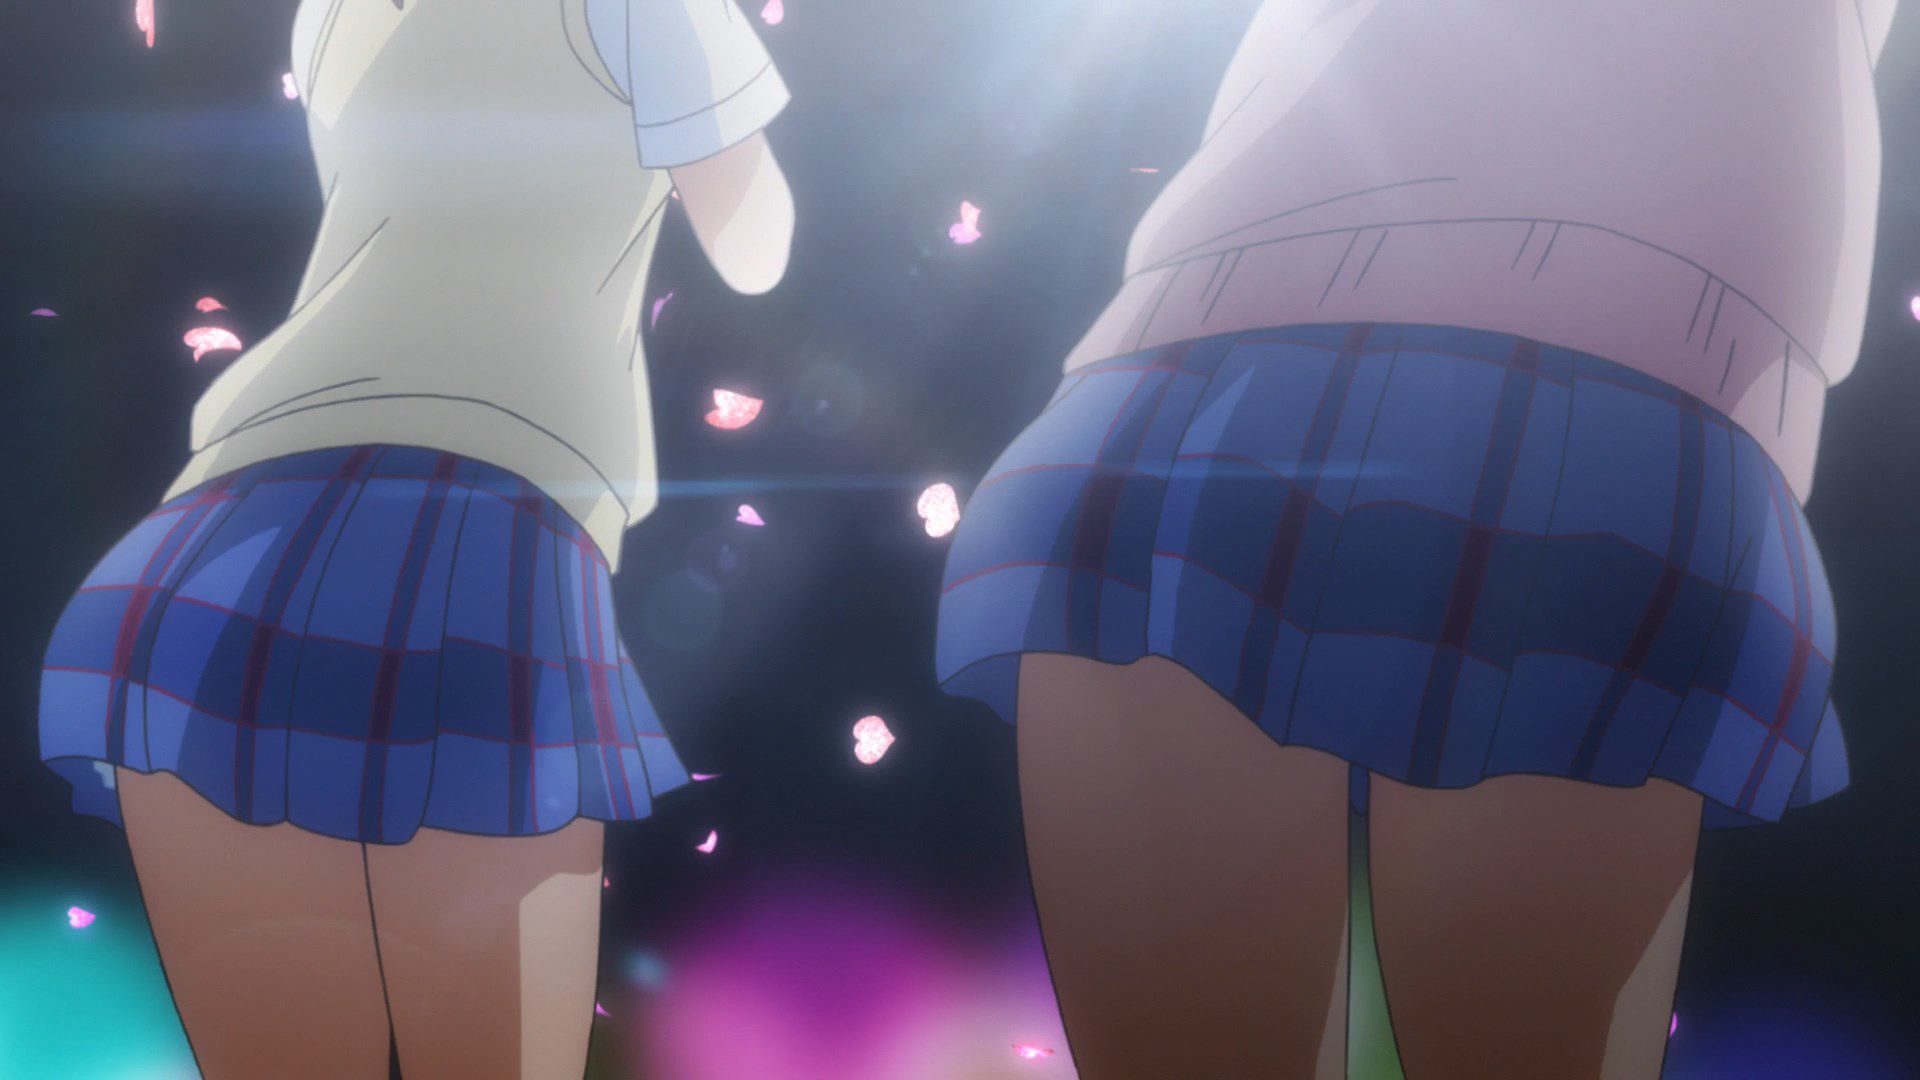 [God images] "love live! ' Μm ' PV's leg is too erotic everyone wakes up to a leg fetish of wwwww 51